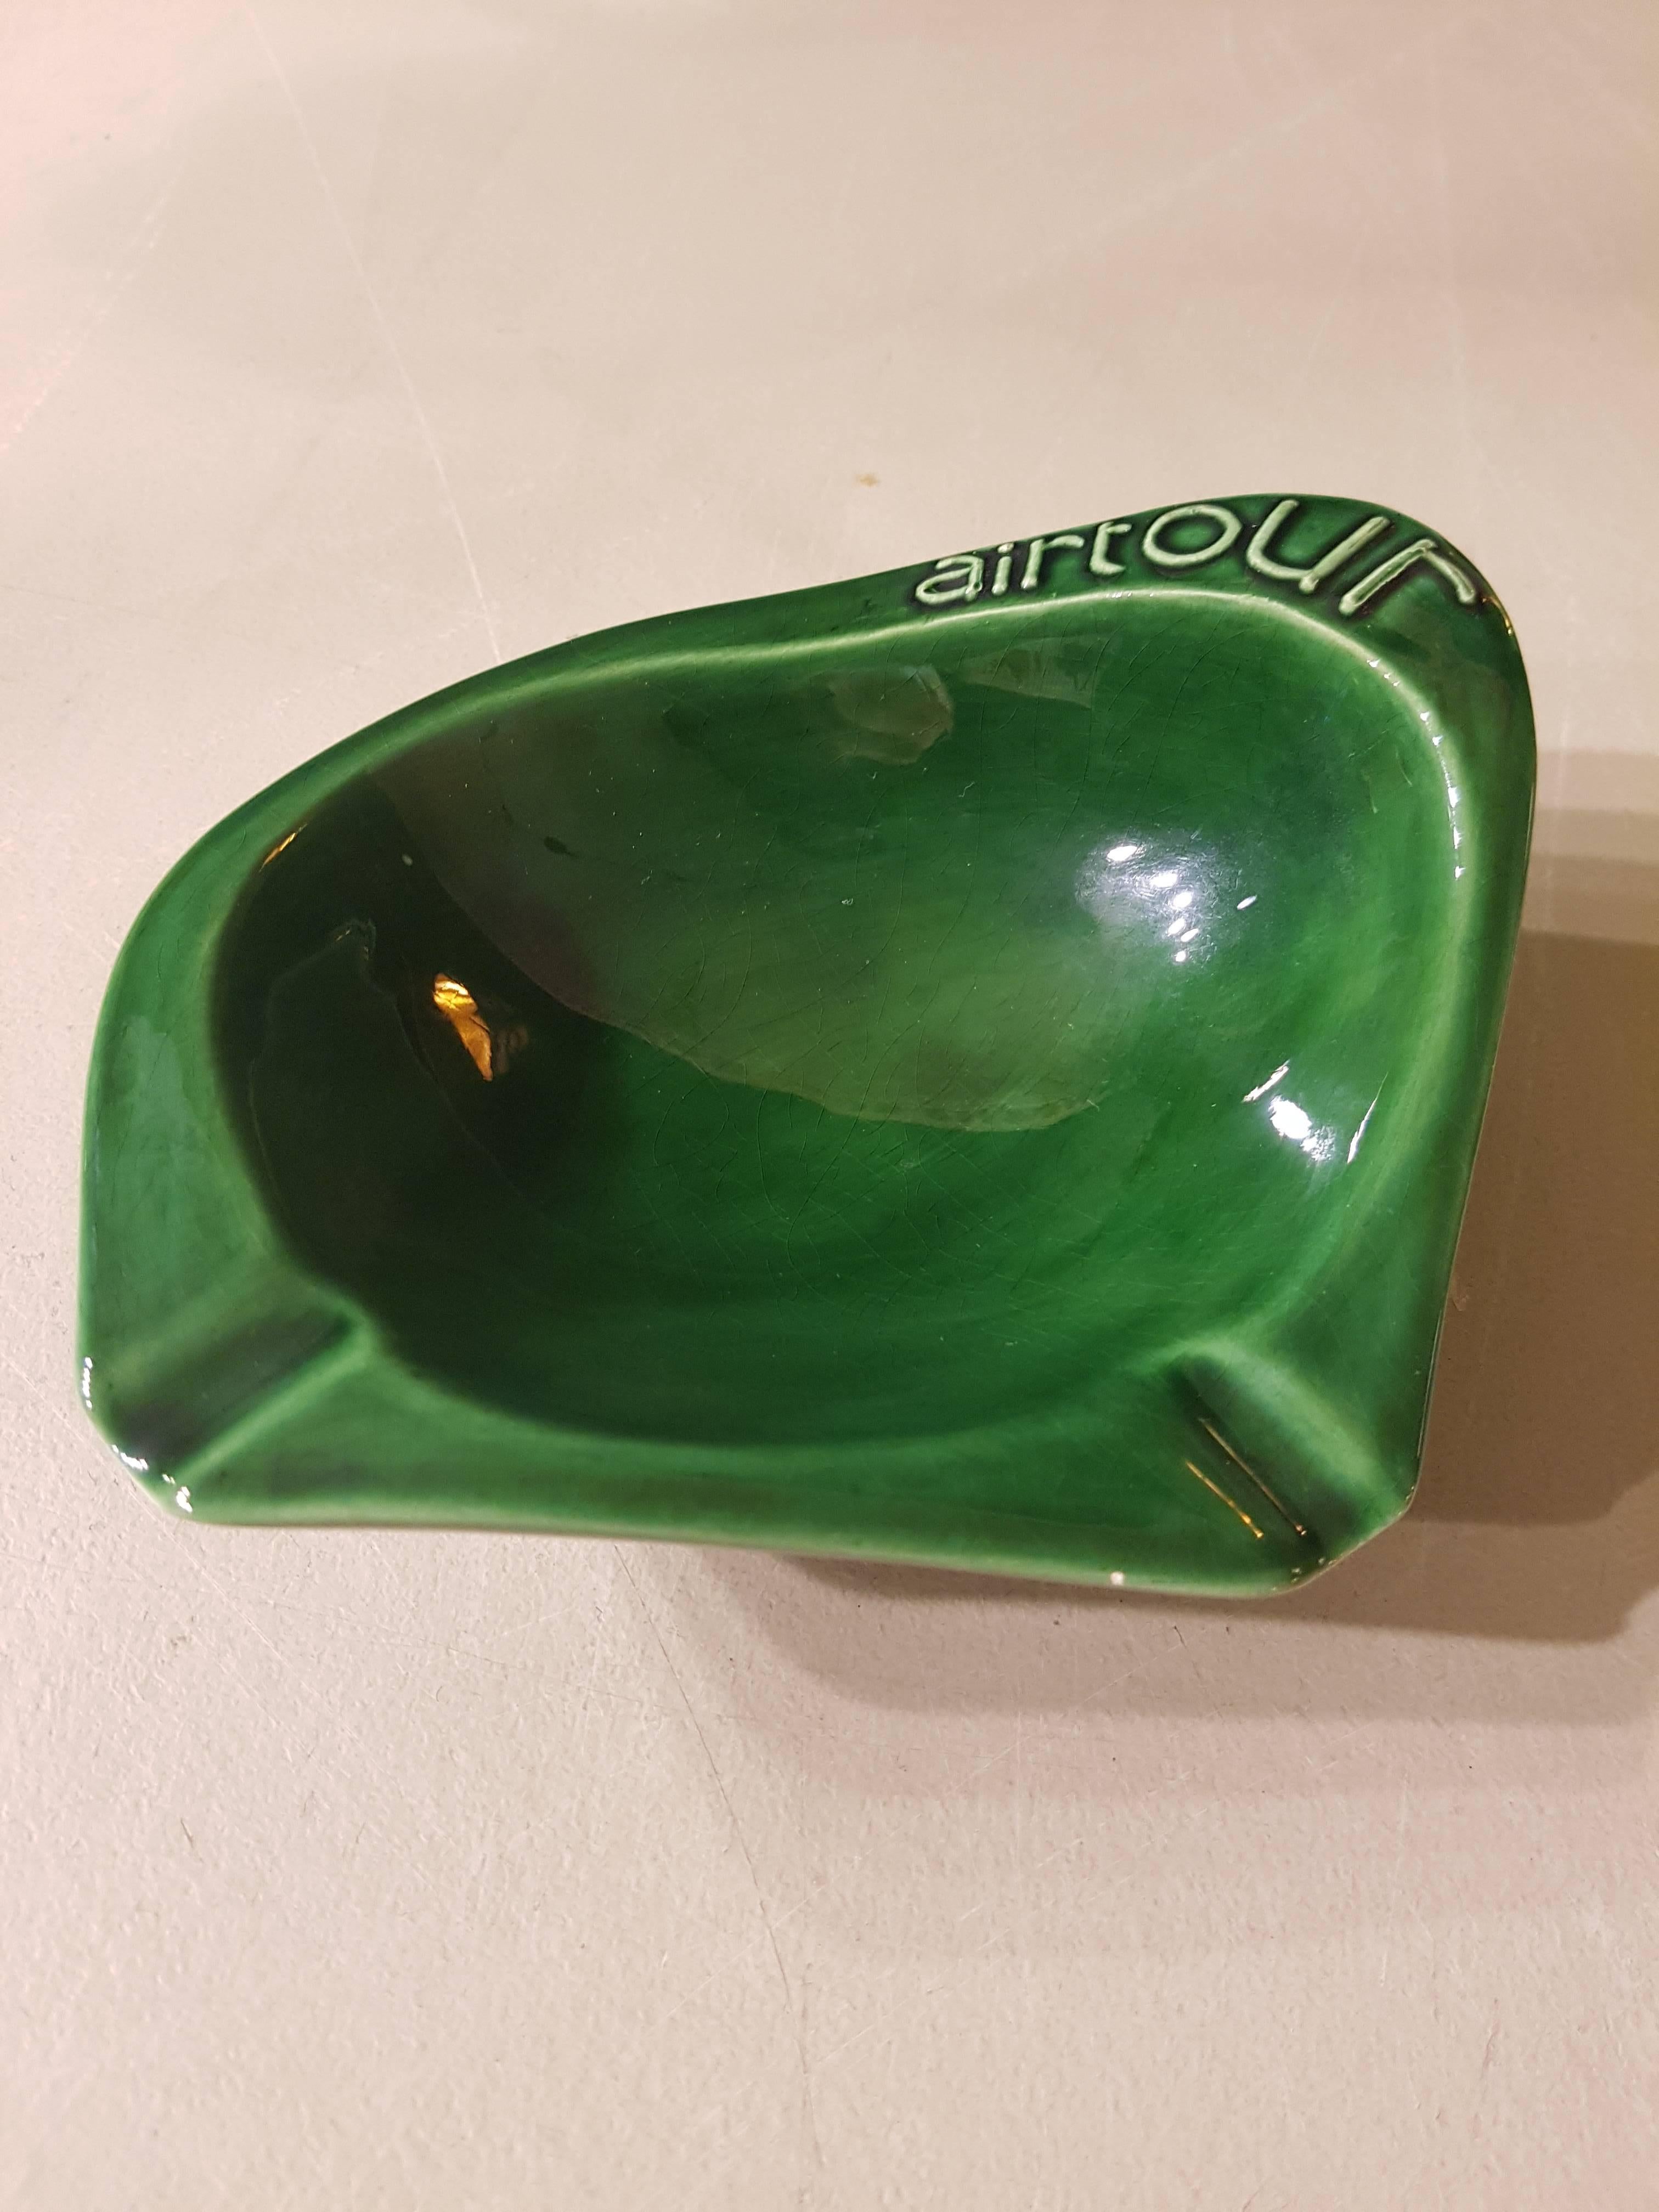 20th Century green german ashtray - Airtour - made of ceramic in the 1960s